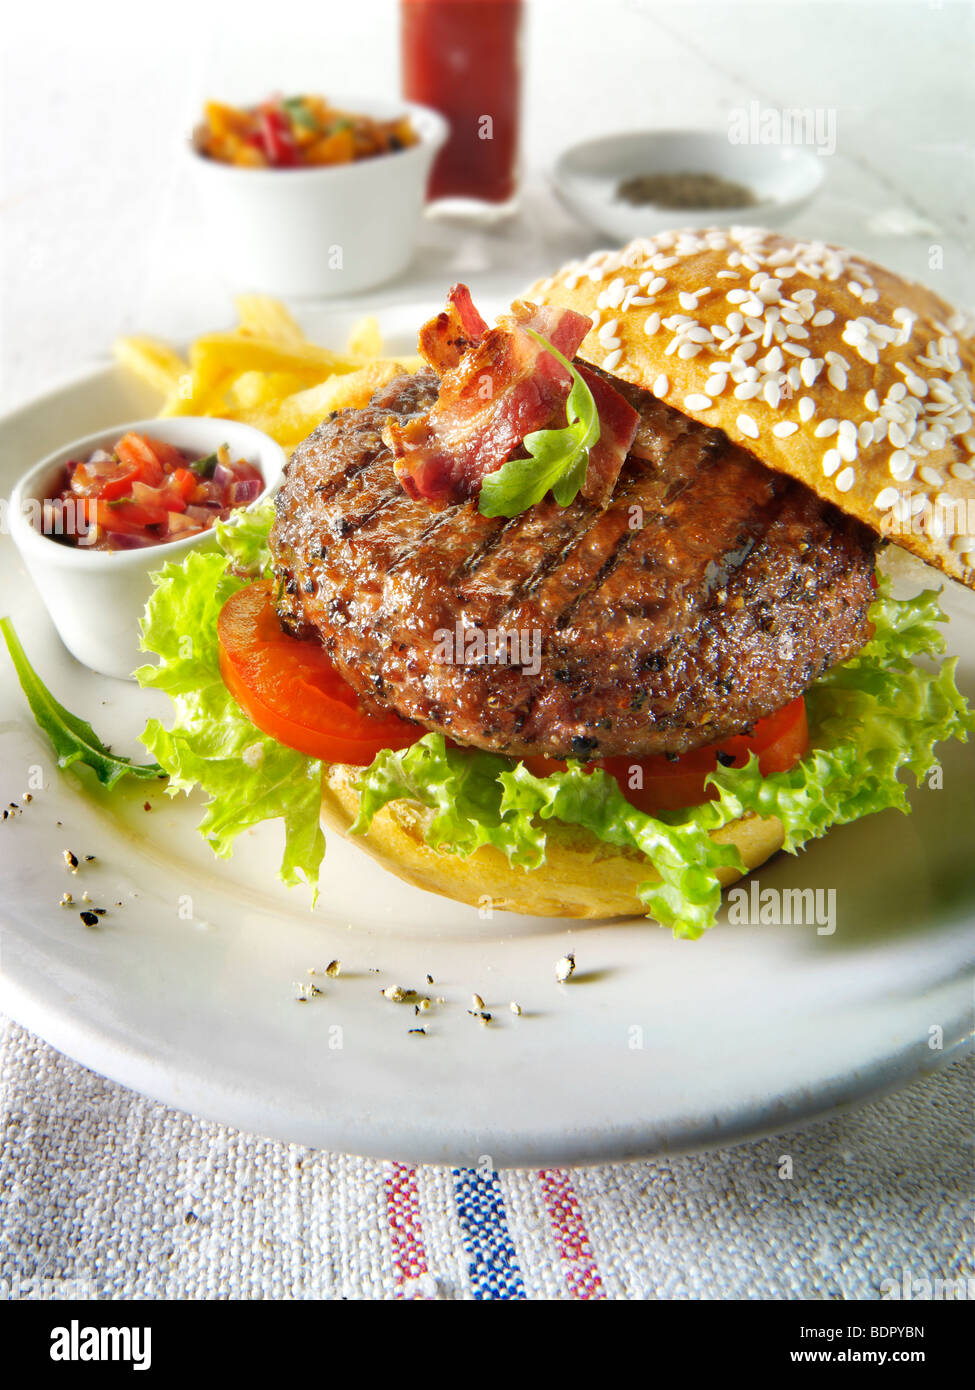 Char grilled beef burger and bacon with chips and salad and a seseme bun Stock Photo